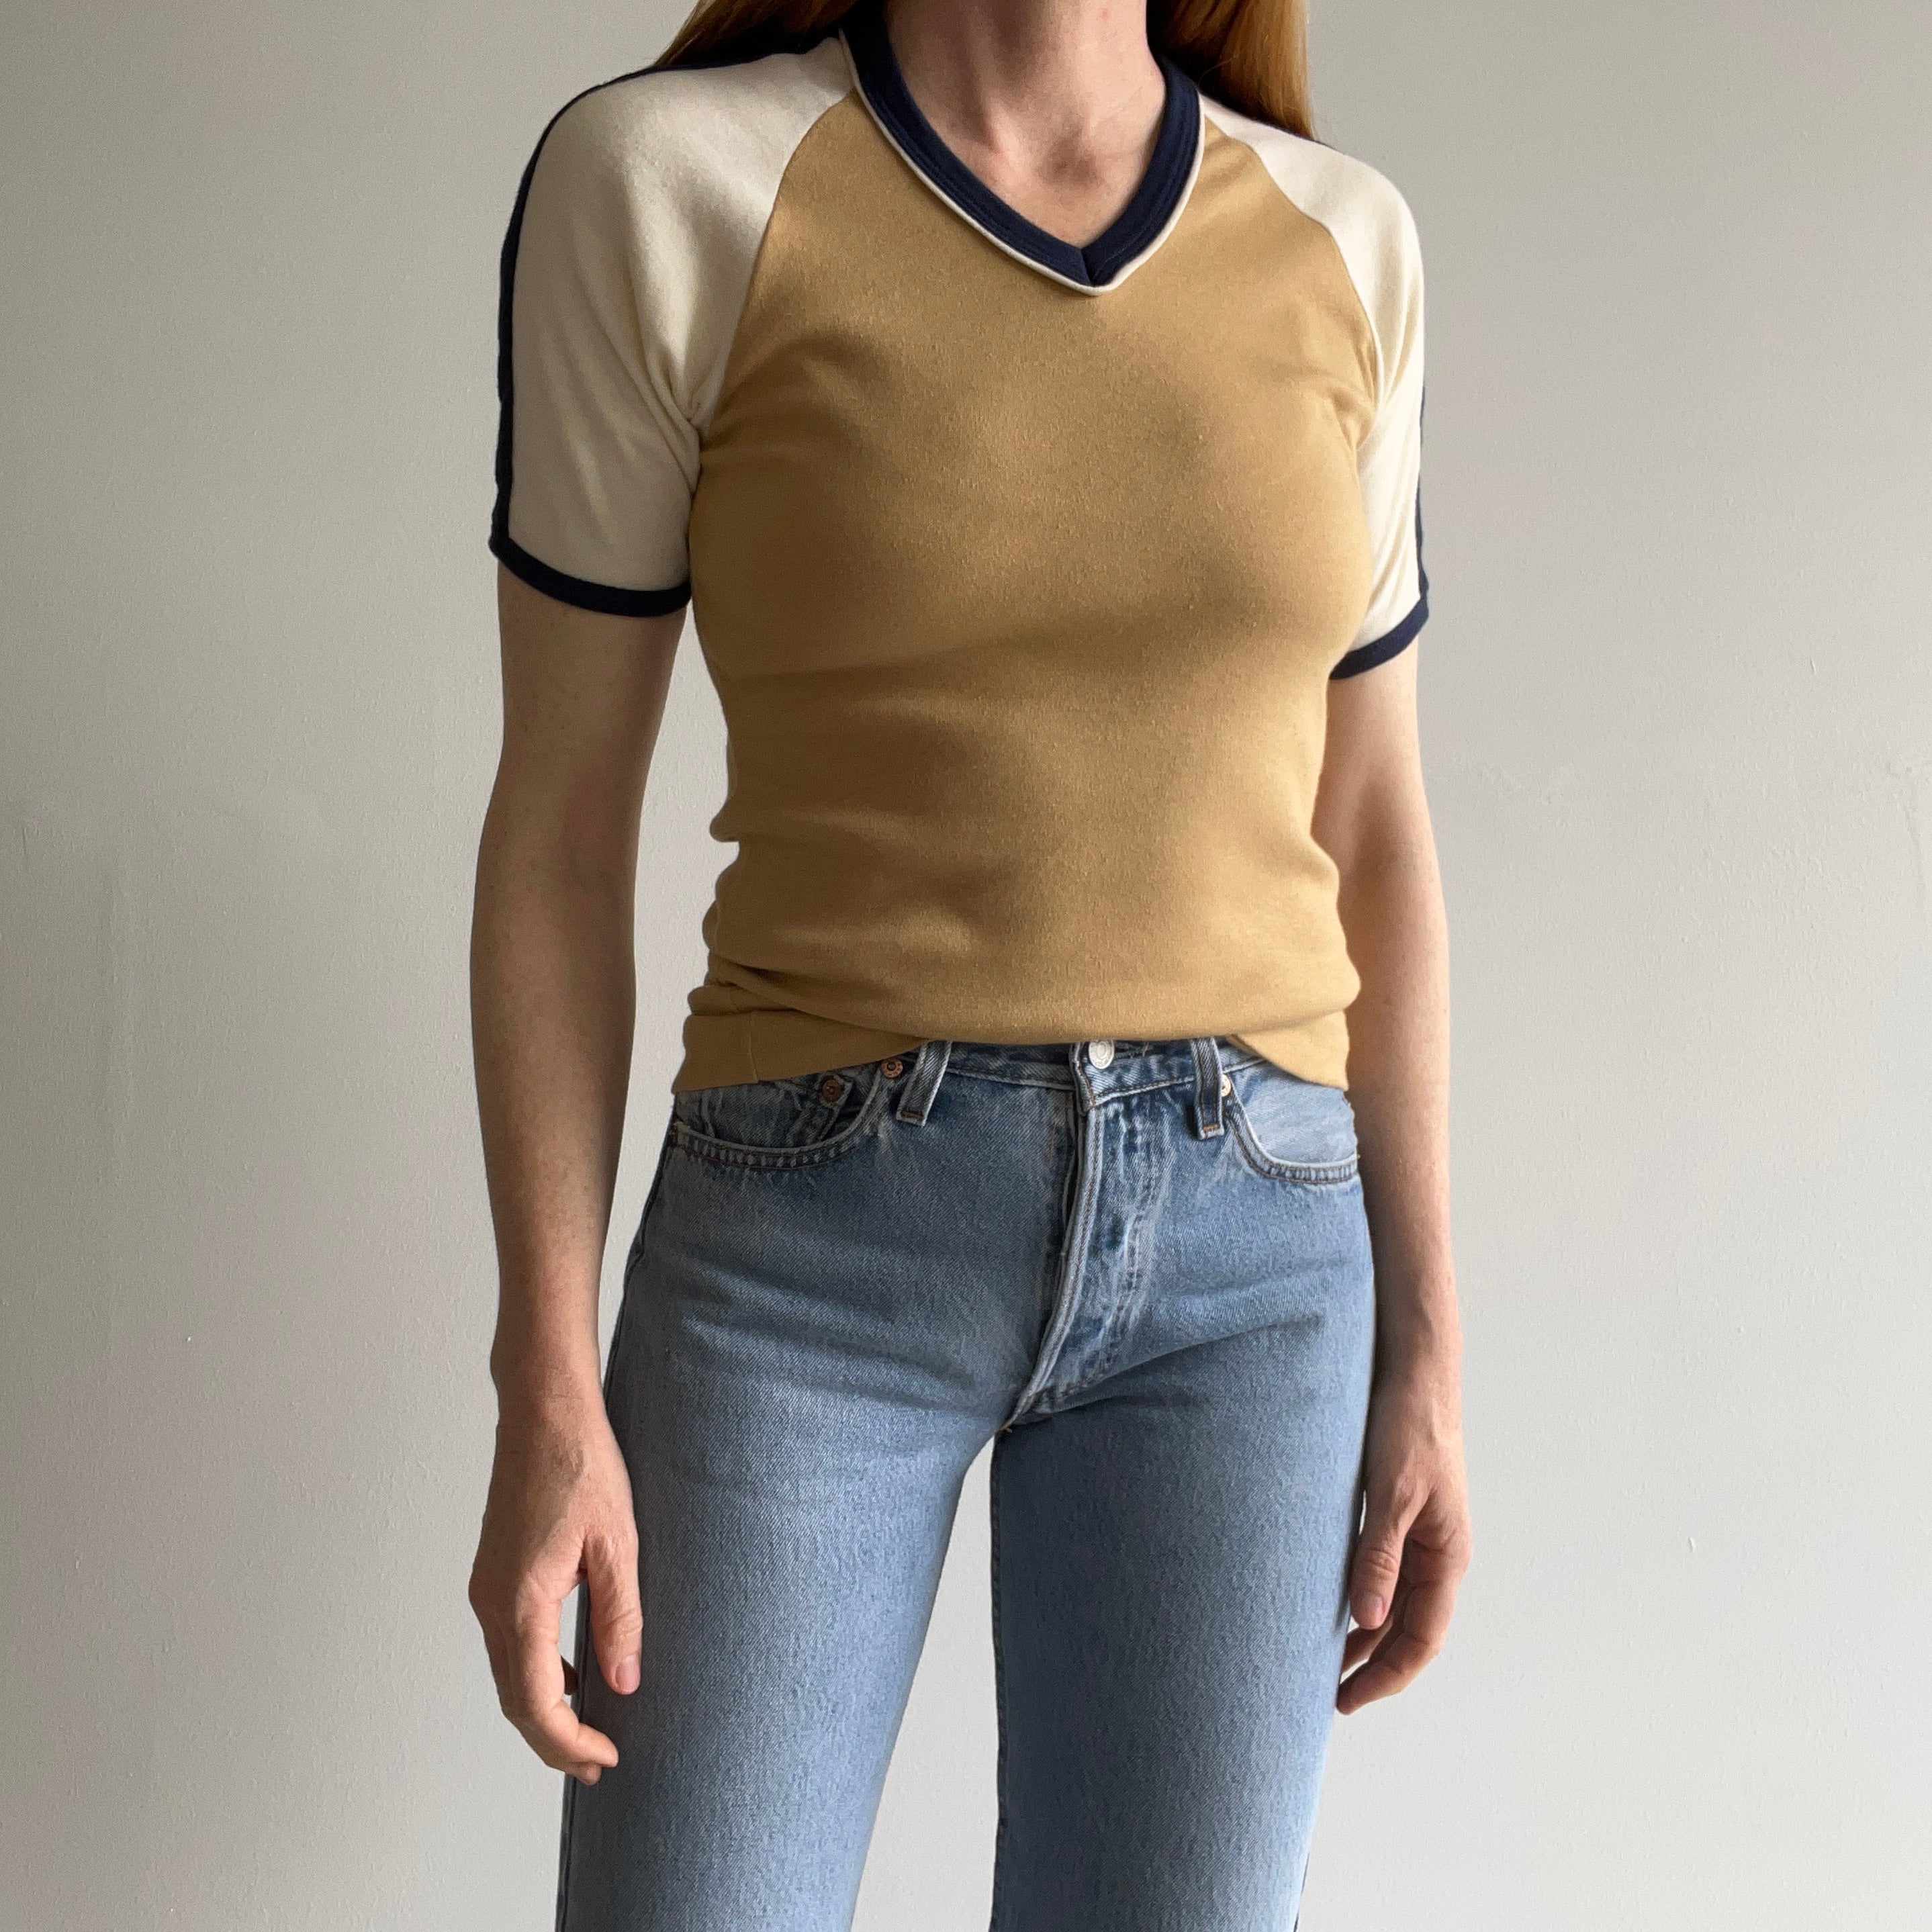 1970/80s Tri Colored Fitted V-Neck Ring T-Shirt - Jersey Knit